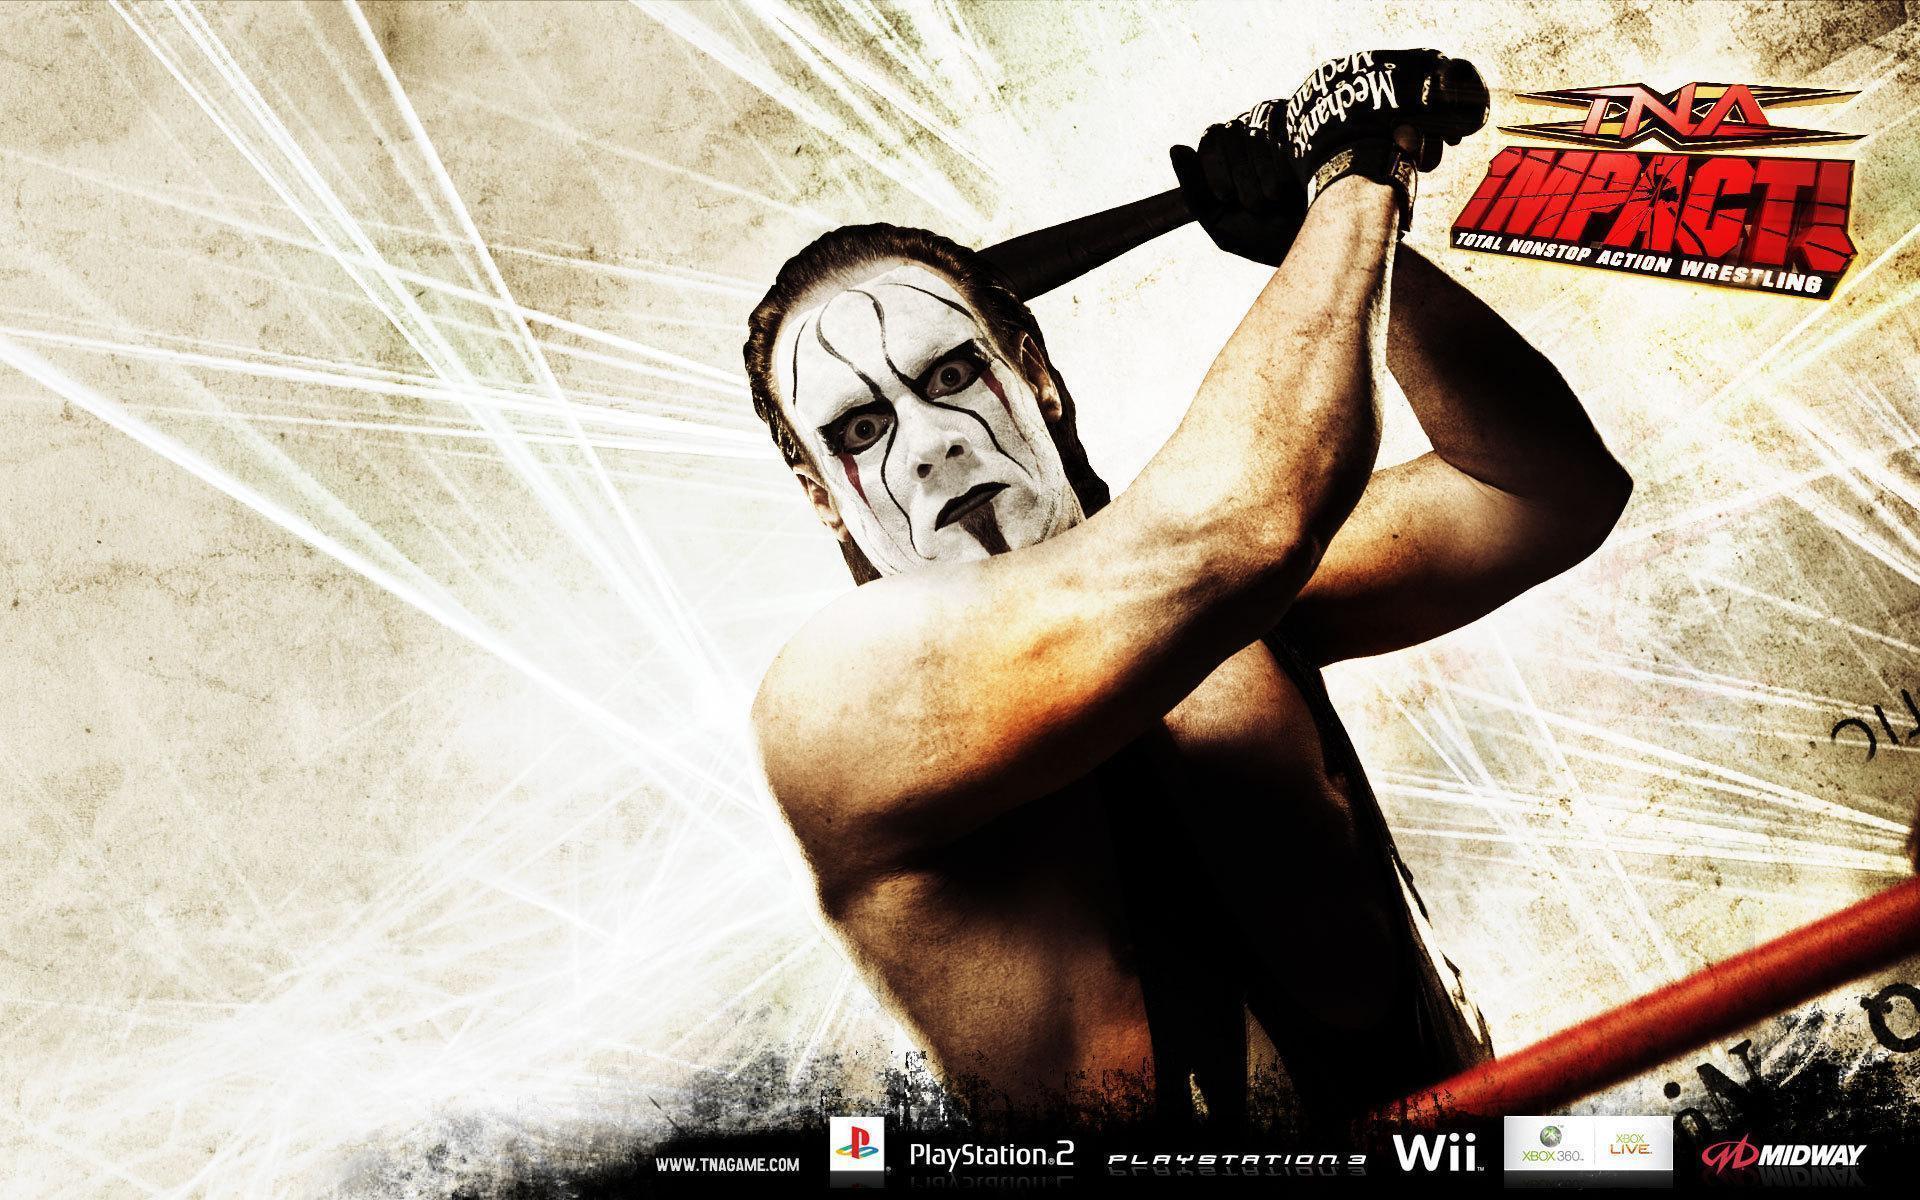 Sting WCW image TNA Impact Sting HD wallpaper and background